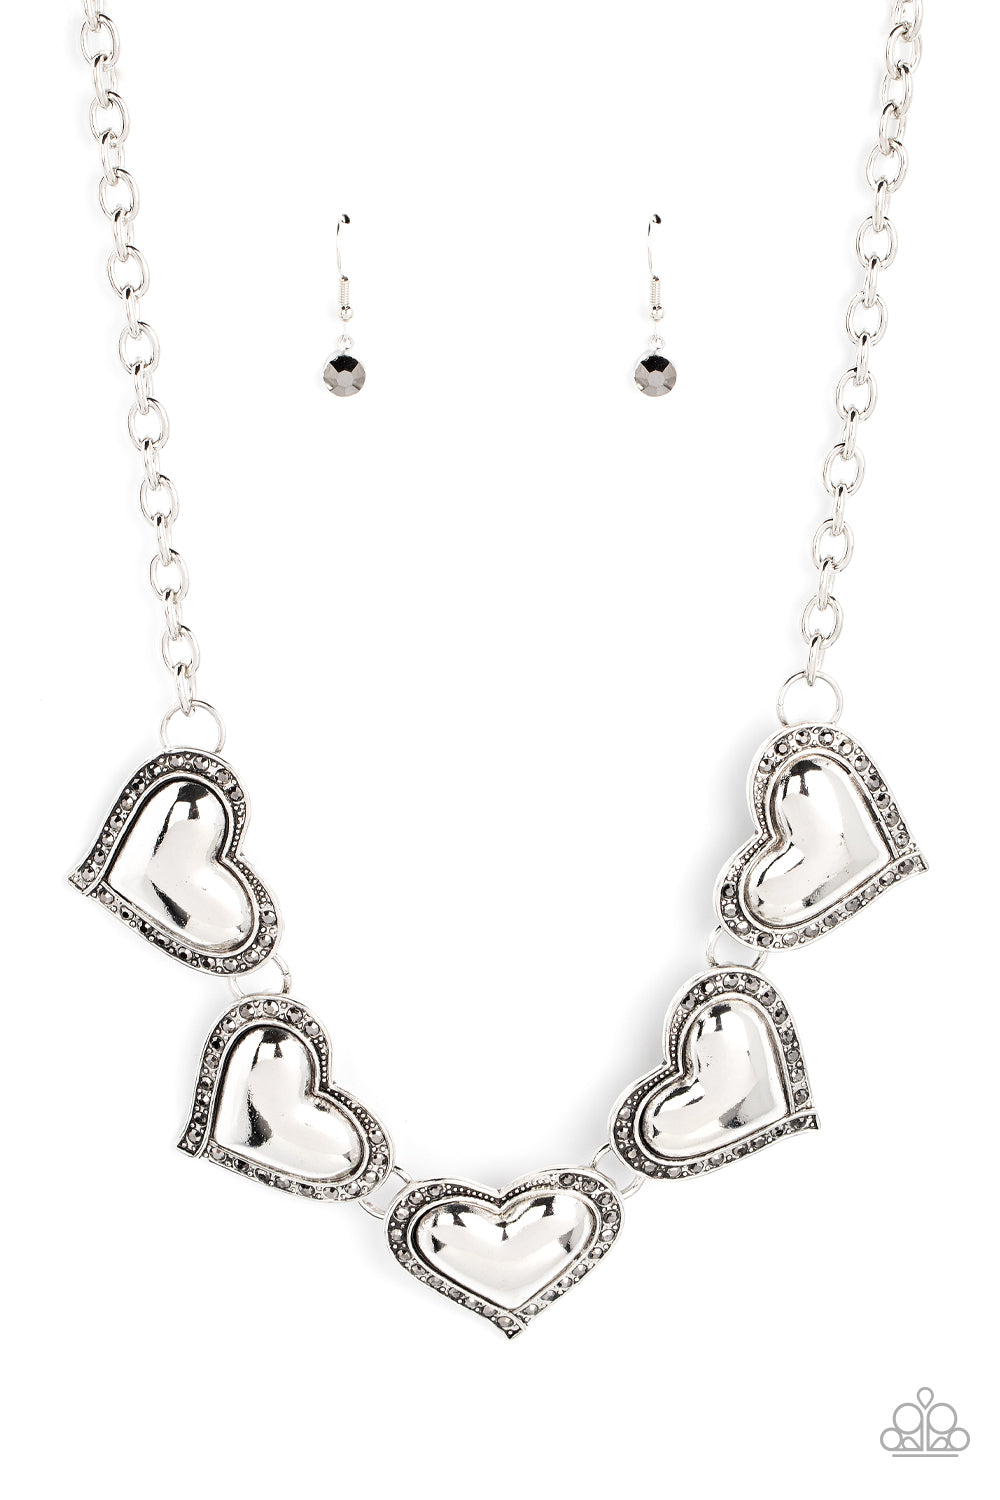 Kindred Hearts - Silver Necklace - A Finishing Touch Jewelry